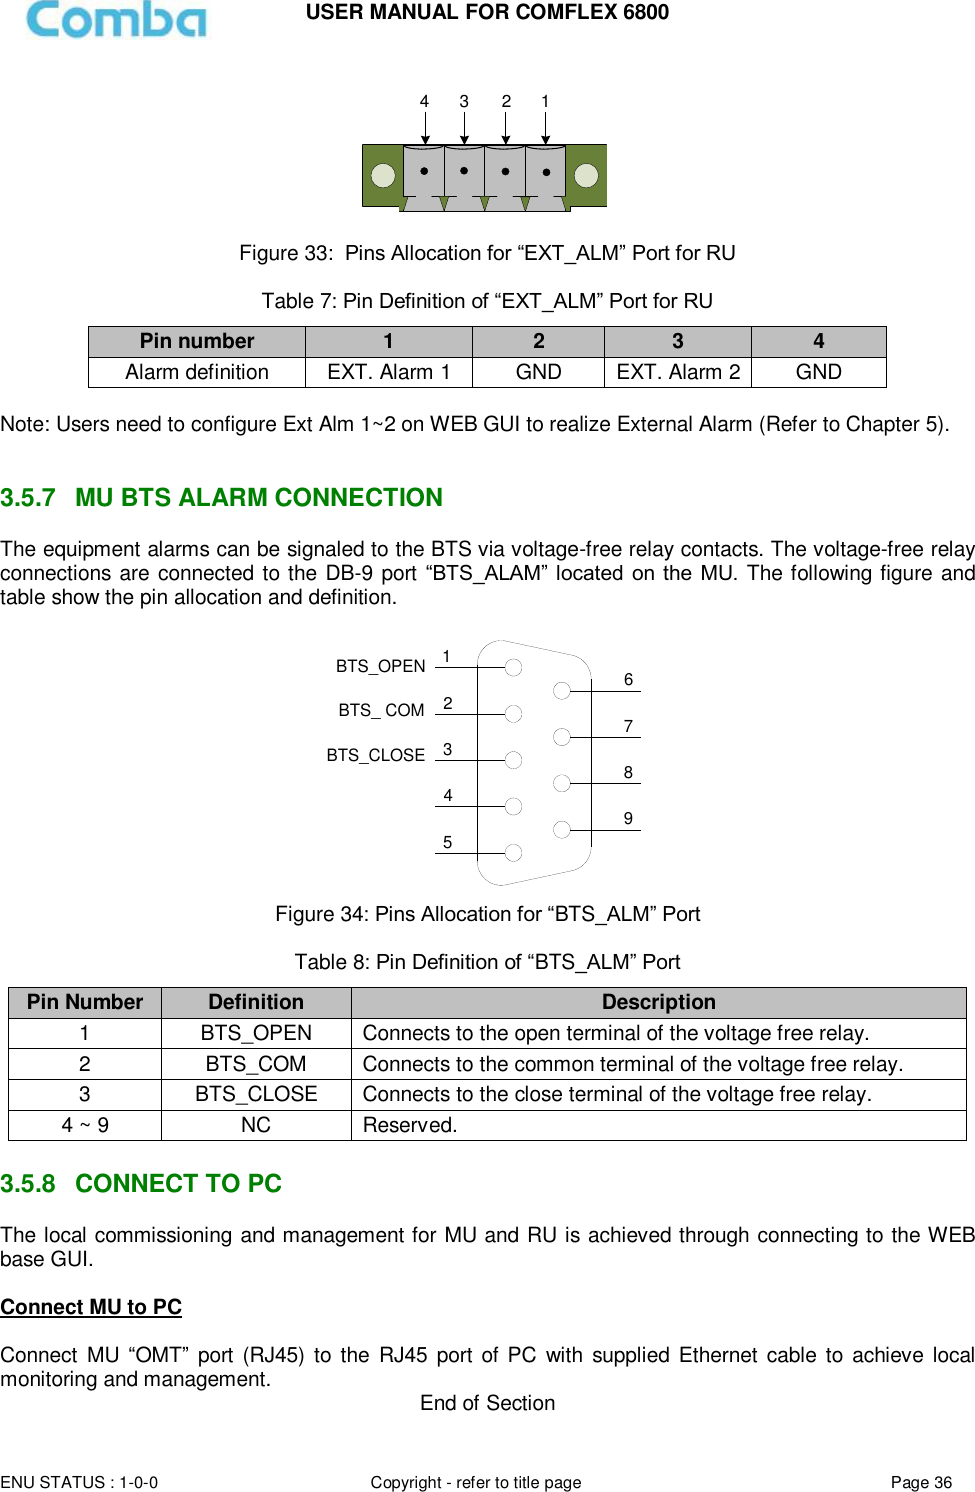 USER MANUAL FOR COMFLEX 6800  ENU STATUS : 1-0-0 Copyright - refer to title page Page 36     1234 Figure 33:  Pins Allocation for “EXT_ALM” Port for RU  Table 7: Pin Definition of “EXT_ALM” Port for RU Pin number 1 2 3 4 Alarm definition EXT. Alarm 1 GND EXT. Alarm 2 GND  Note: Users need to configure Ext Alm 1~2 on WEB GUI to realize External Alarm (Refer to Chapter 5).    3.5.7  MU BTS ALARM CONNECTION The equipment alarms can be signaled to the BTS via voltage-free relay contacts. The voltage-free relay connections are connected to the DB-9 port “BTS_ALAM”  located on the  MU. The following figure and table show the pin allocation and definition.   124356798BTS_OPENBTS_CLOSEBTS_ COM Figure 34: Pins Allocation for “BTS_ALM” Port  Table 8: Pin Definition of “BTS_ALM” Port Pin Number Definition Description 1 BTS_OPEN Connects to the open terminal of the voltage free relay. 2 BTS_COM  Connects to the common terminal of the voltage free relay. 3 BTS_CLOSE Connects to the close terminal of the voltage free relay. 4 ~ 9 NC Reserved.  3.5.8  CONNECT TO PC The local commissioning and management for MU and RU is achieved through connecting to the WEB base GUI.  Connect MU to PC  Connect  MU  “OMT”  port  (RJ45) to  the  RJ45  port  of PC  with  supplied Ethernet  cable  to  achieve local monitoring and management.  End of Section 